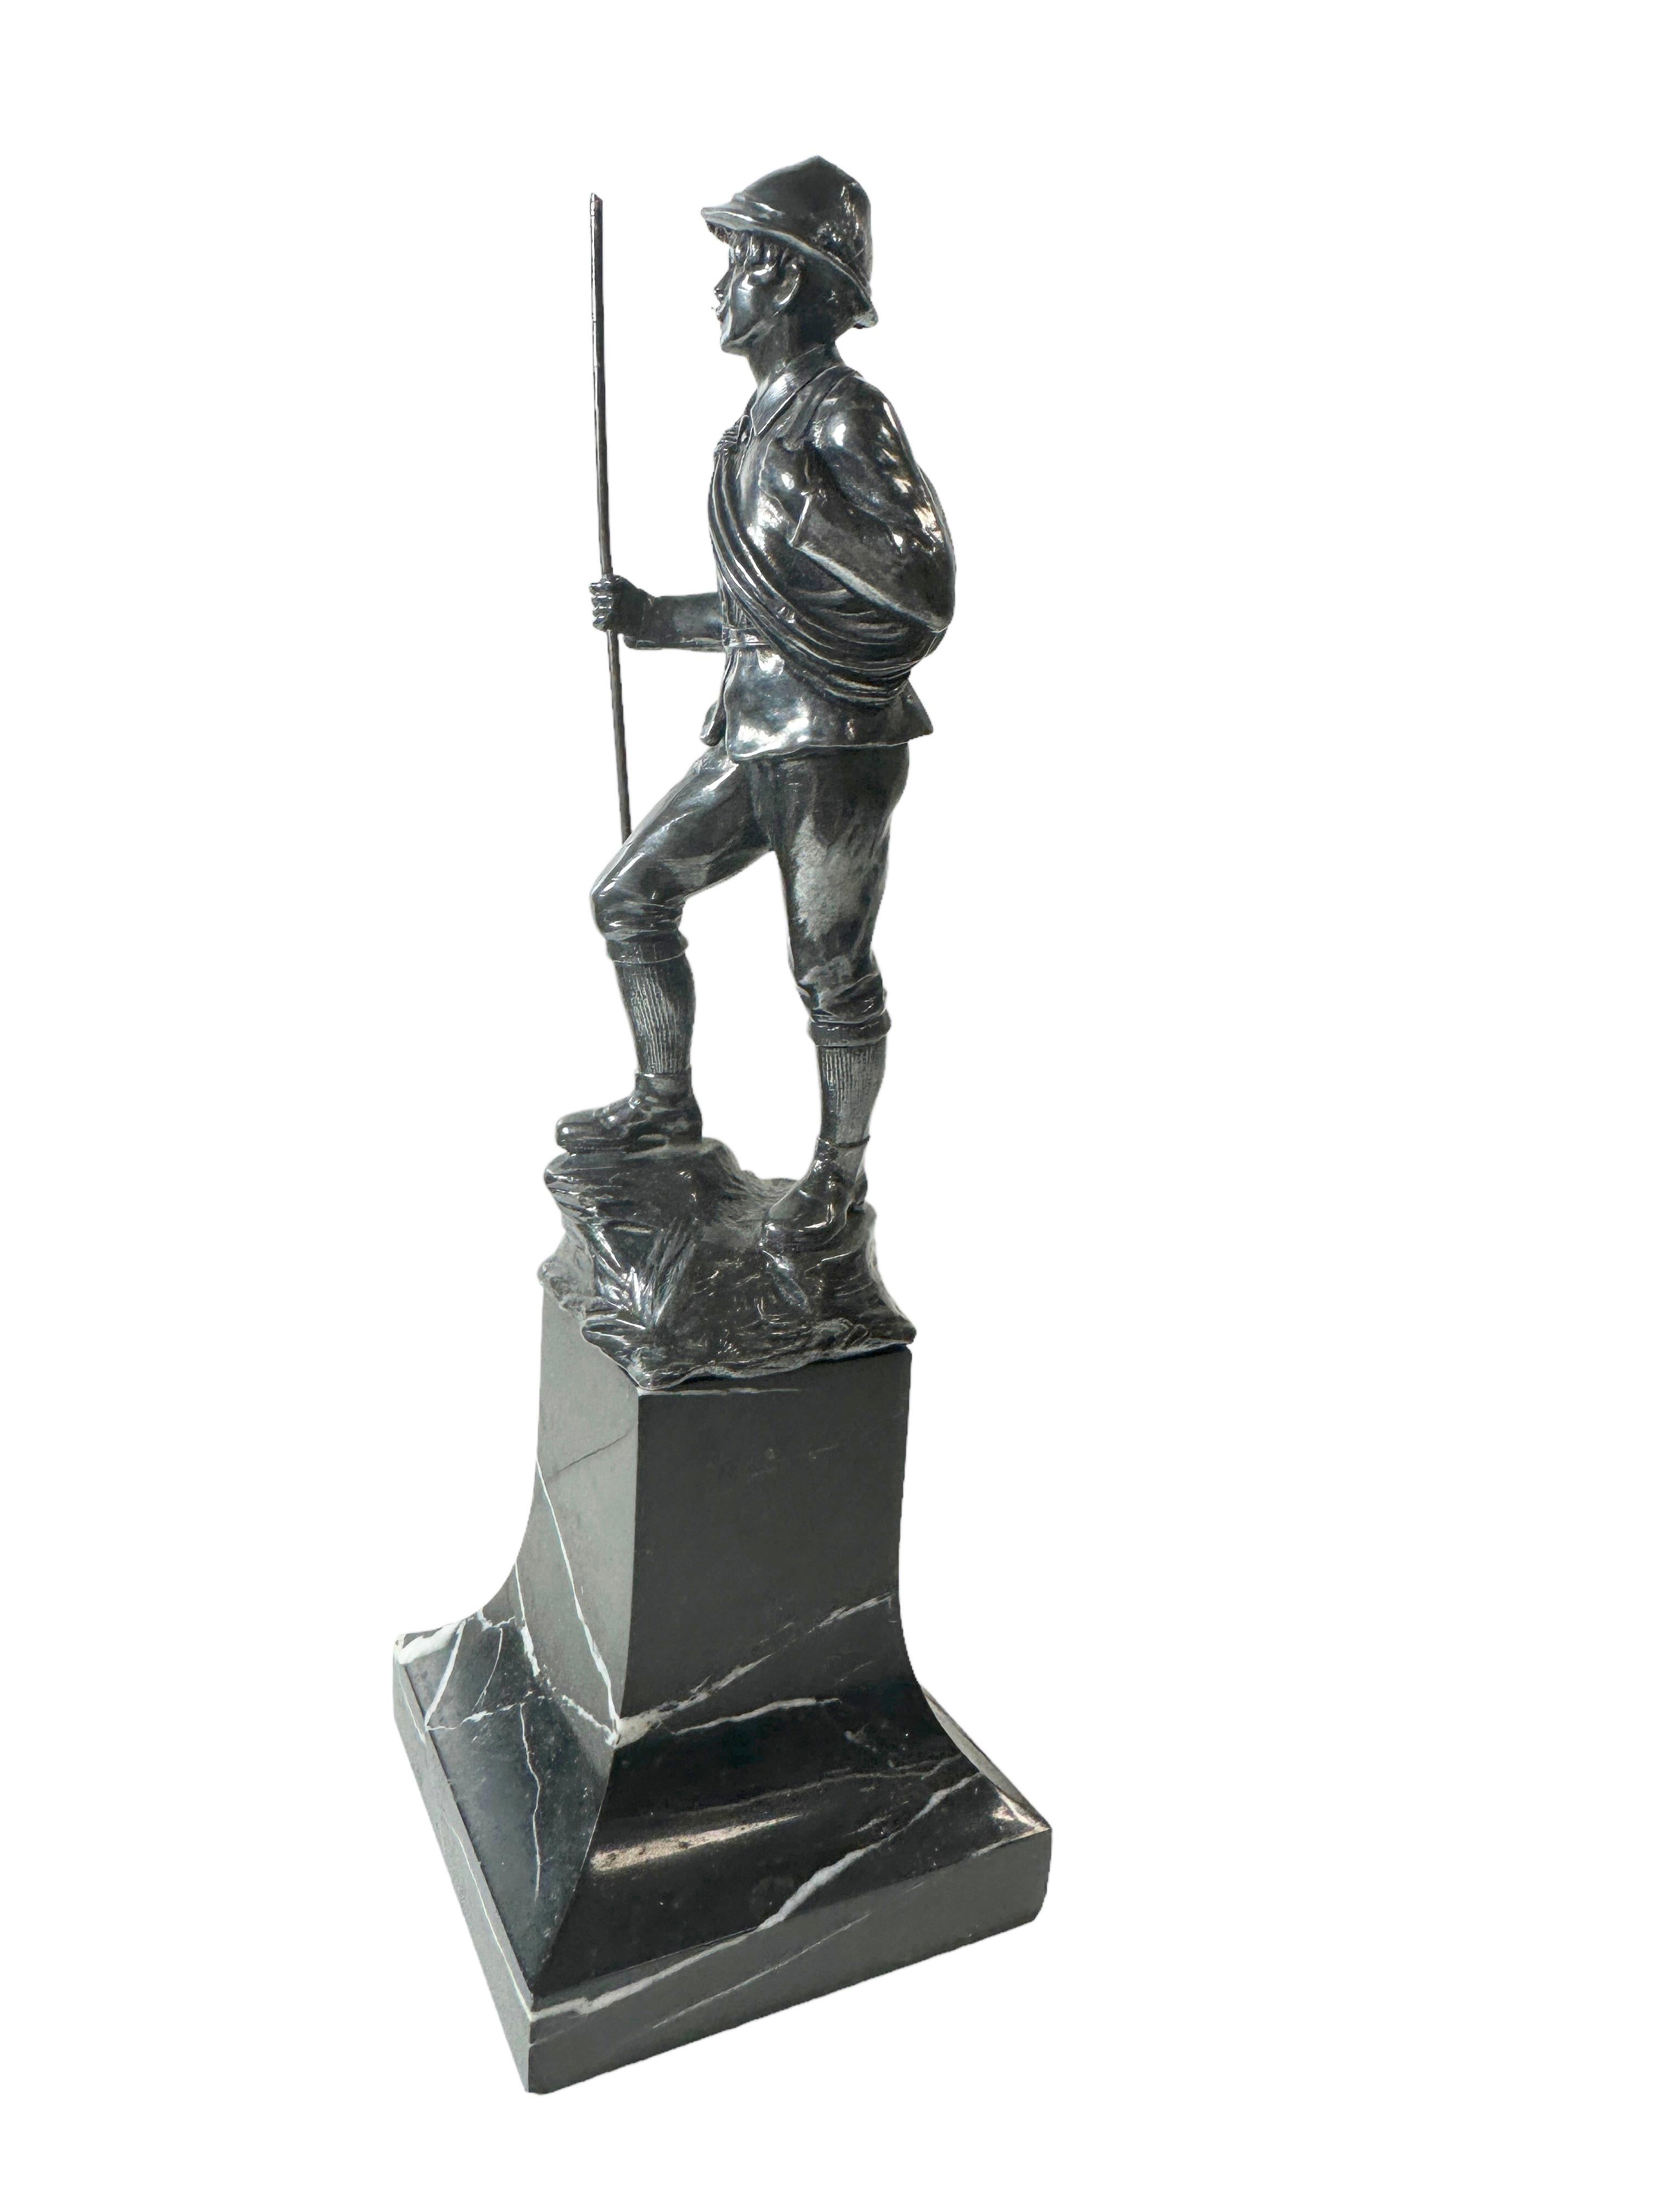 A classic decorative metal statue. Some wear with a nice patina, but this is old-age. Made of metal, fixed on a marble base. It is a nice and beautiful sculpture of Mountain Climber. Found at an estate sale in Vienna, Austria. A nice addition to any